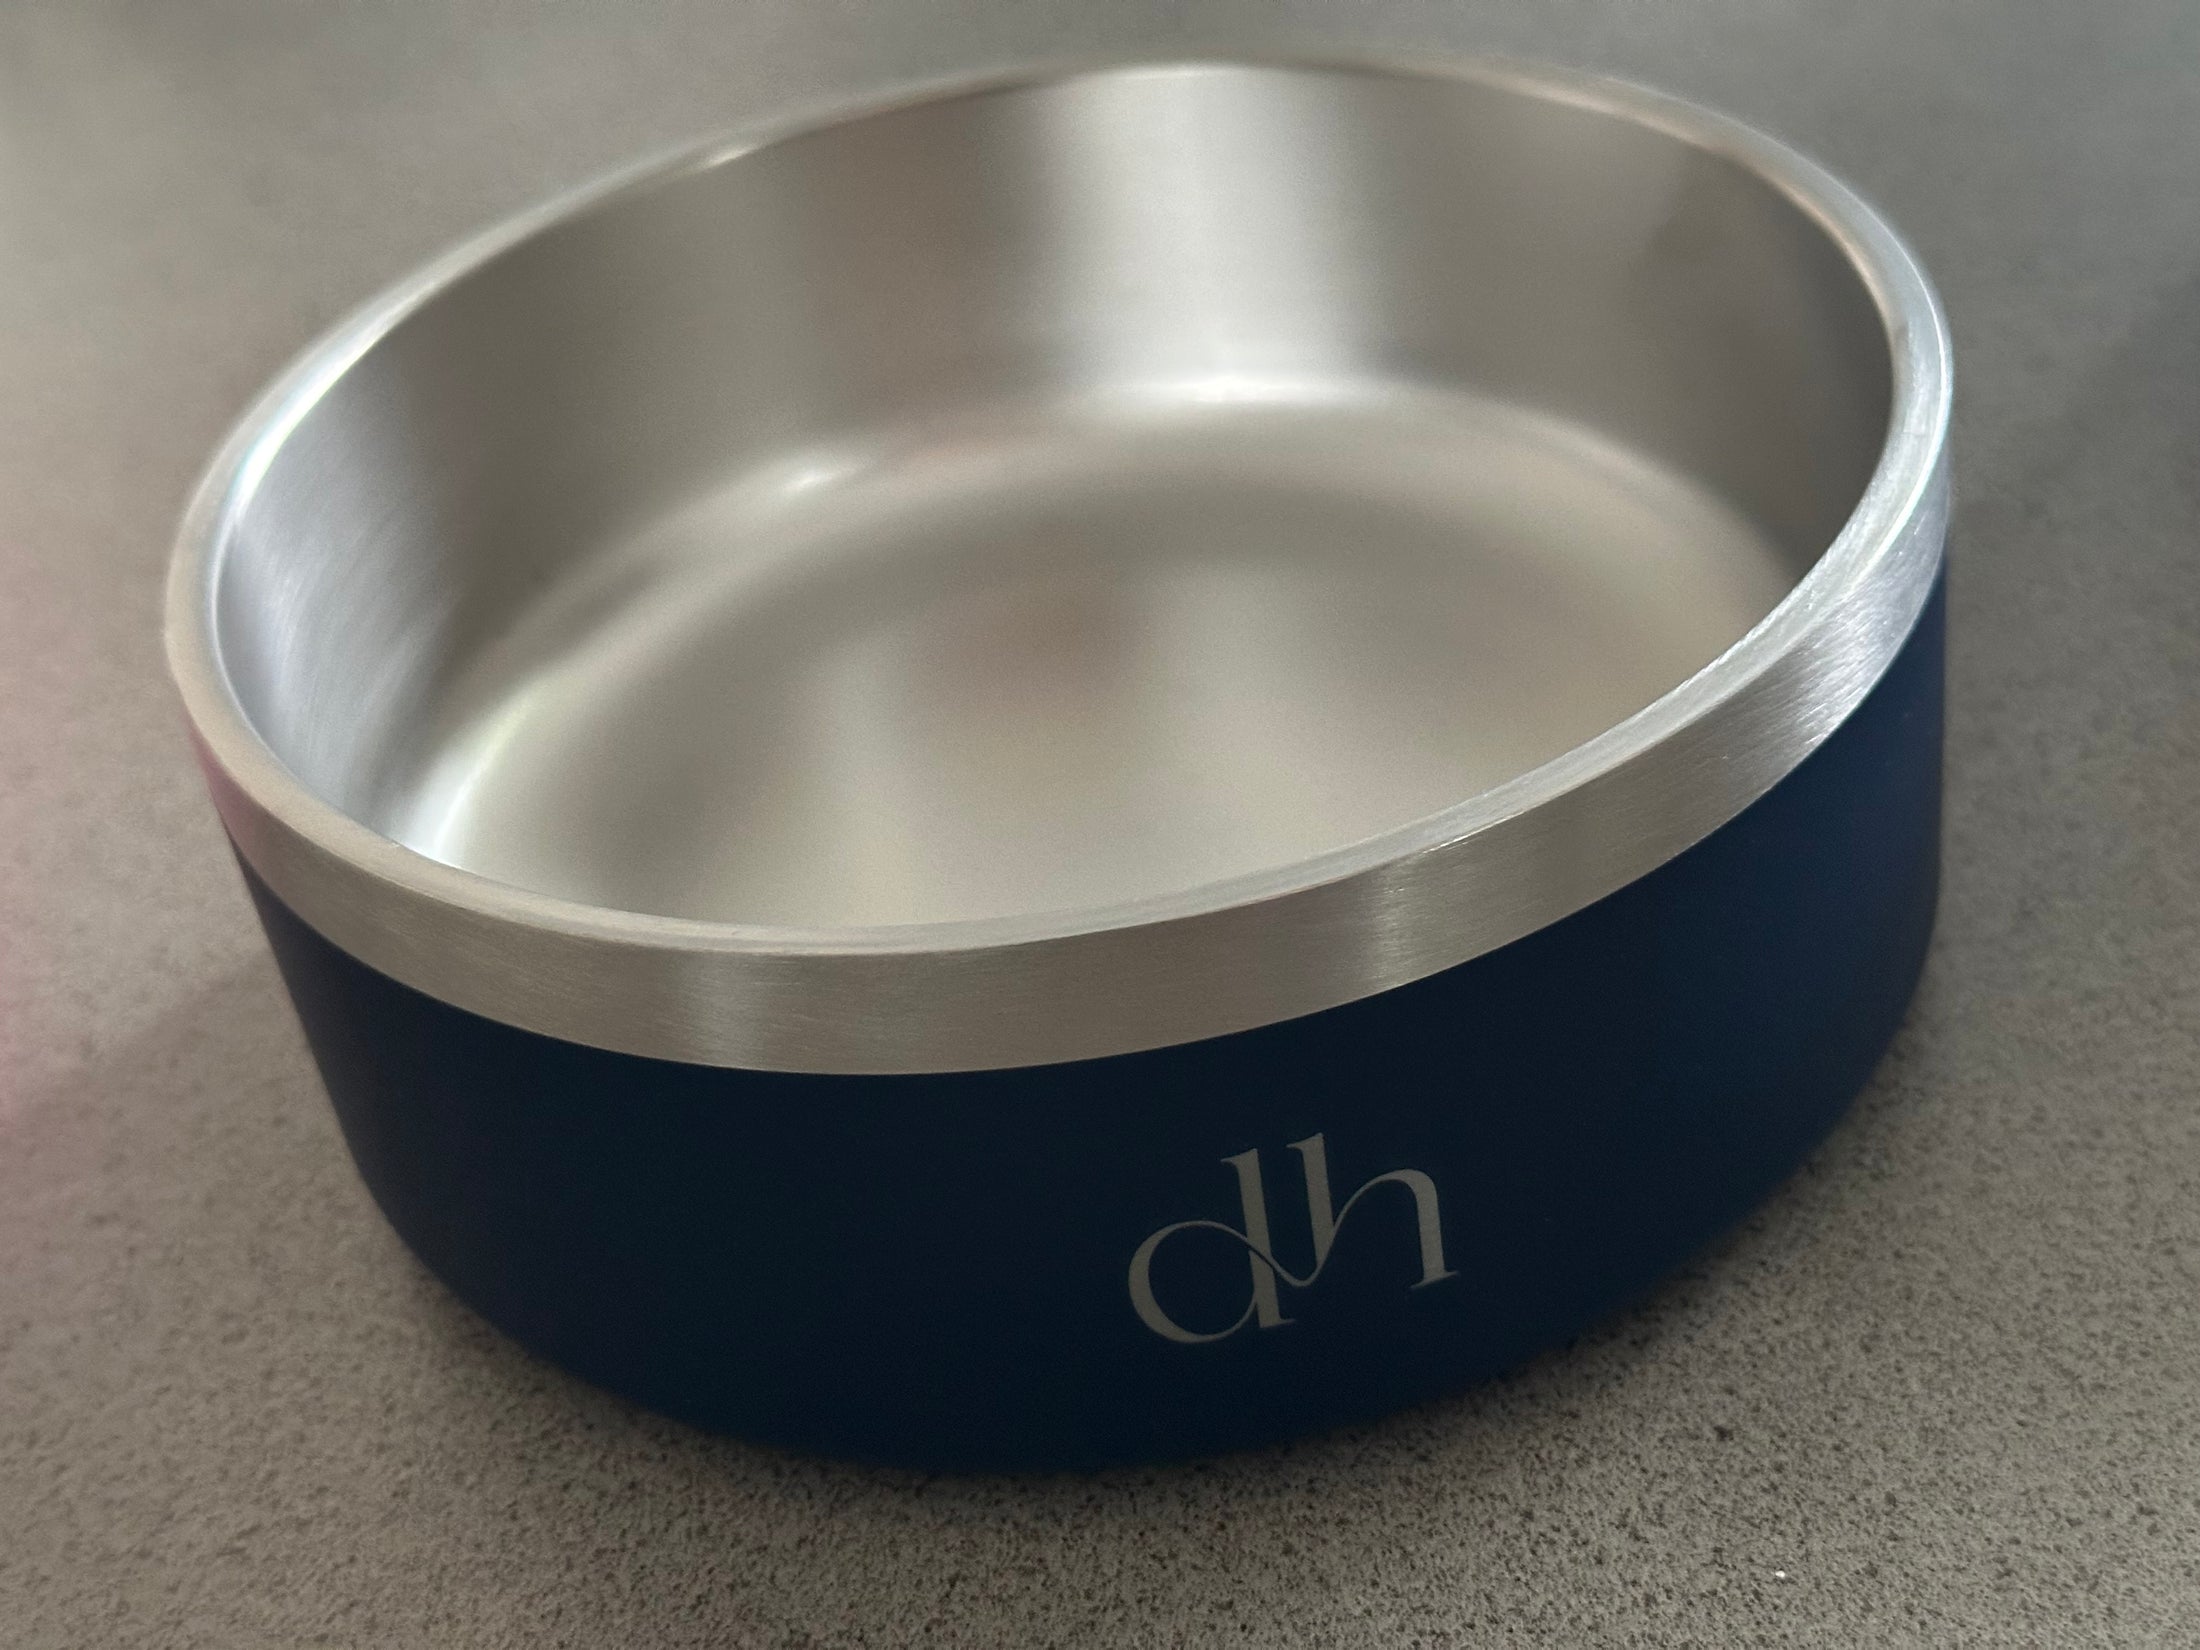 DH "YETI STYLE" Doodle Head Food/Water Bowl-Stainless Steel